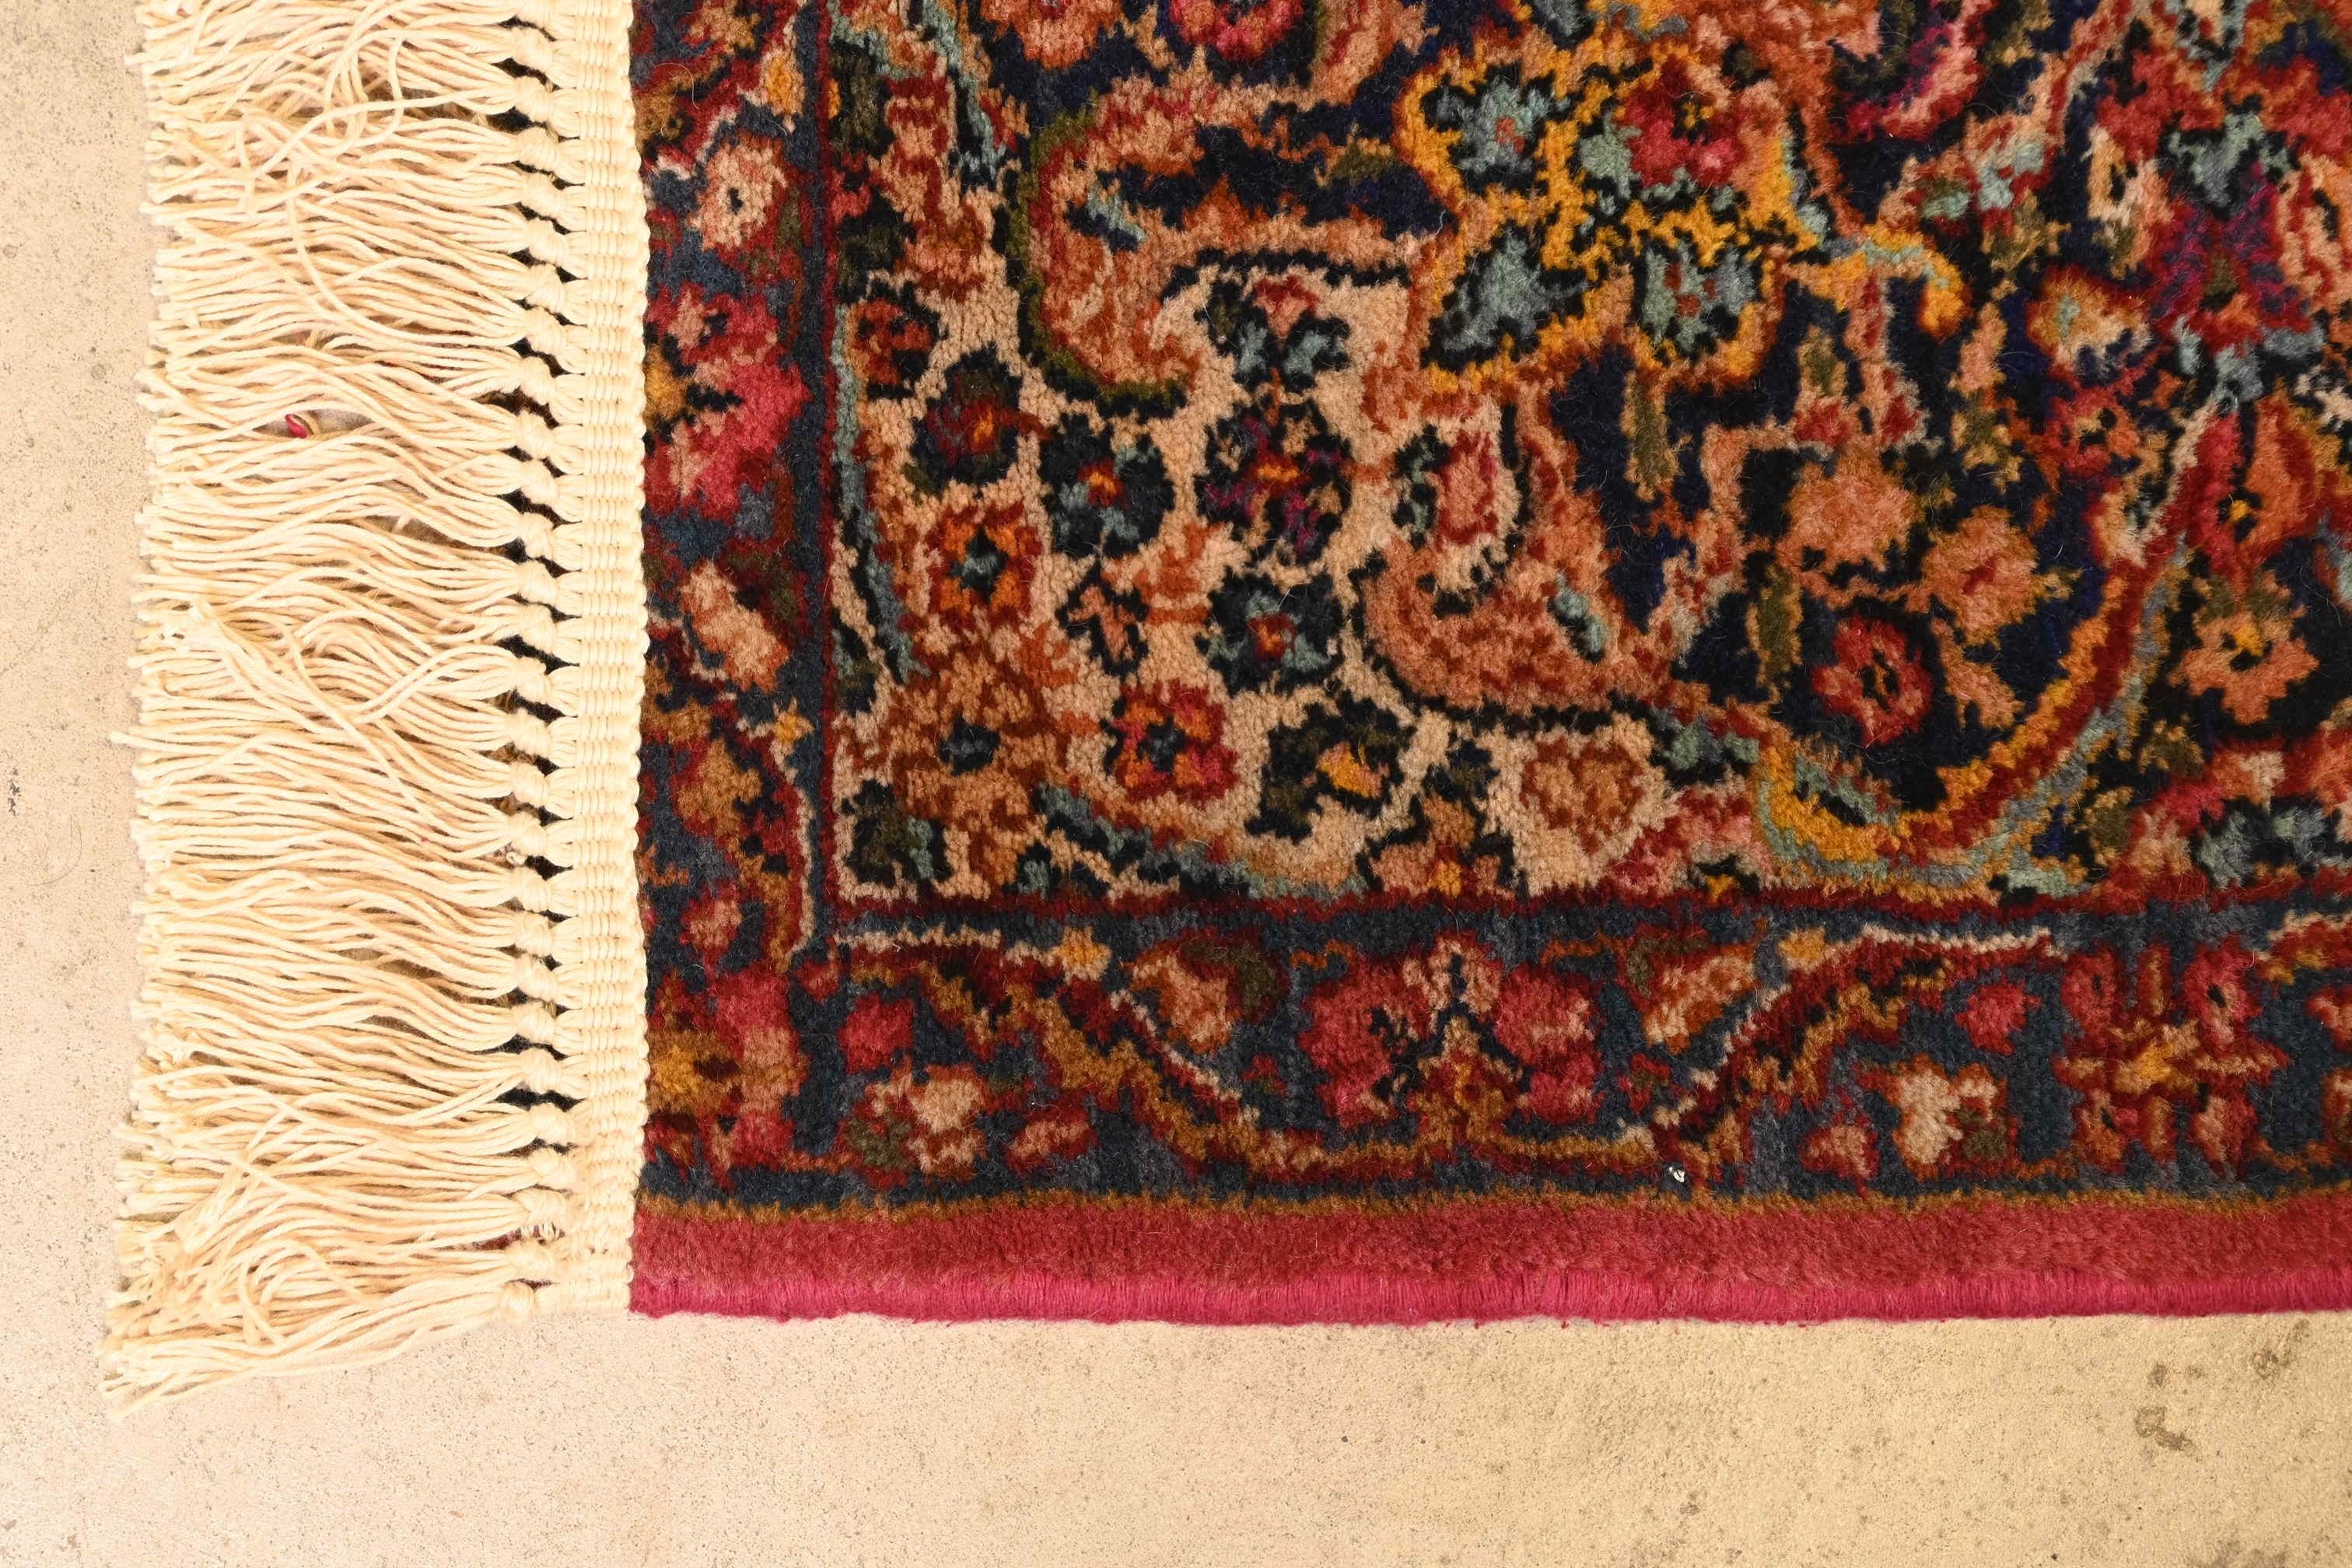 Karastan Kirman Room Size Wool Rug, Circa 1940s In Good Condition For Sale In South Bend, IN